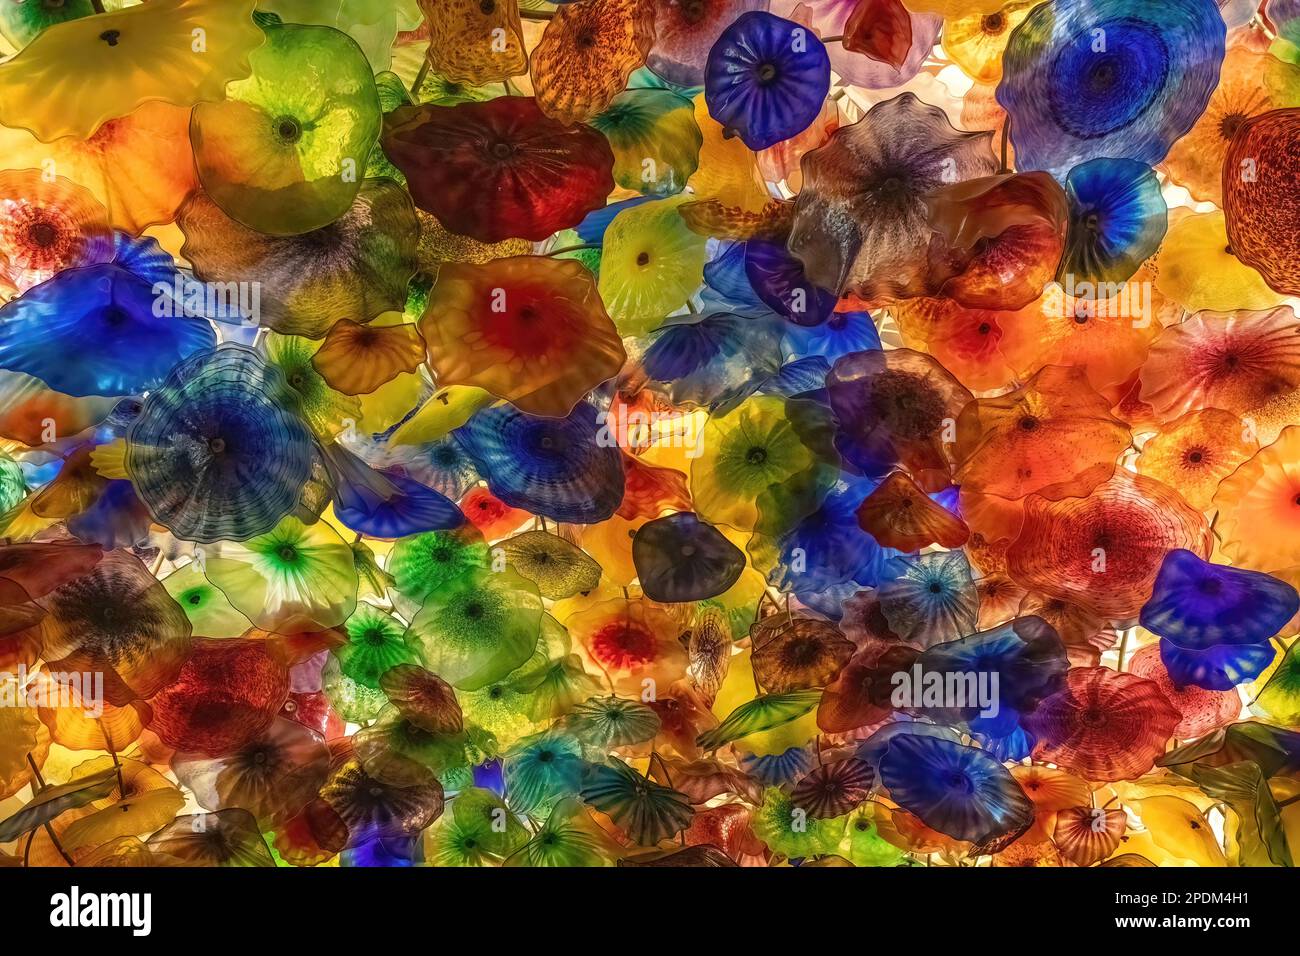 Closeup of the Dale Chihuly blown glass sculpture installed on the ceiling of the Bellagio Hotel and Casino in Las Vegas, Nevada USA. Stock Photo